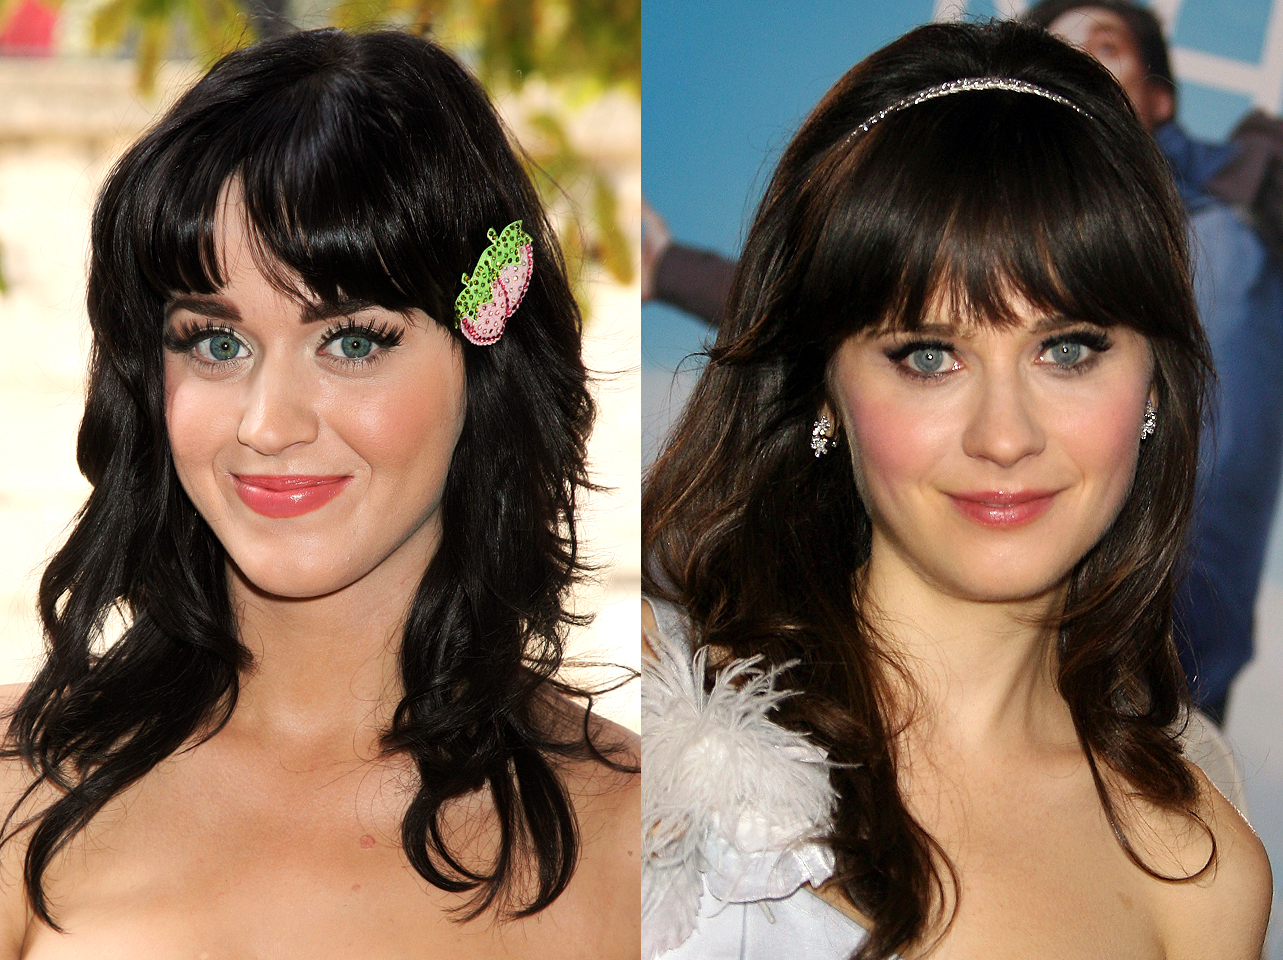 Katy Perry in France in 2008 | Zooey Deschanel in Los Angeles in 2008 | Source: Getty Images